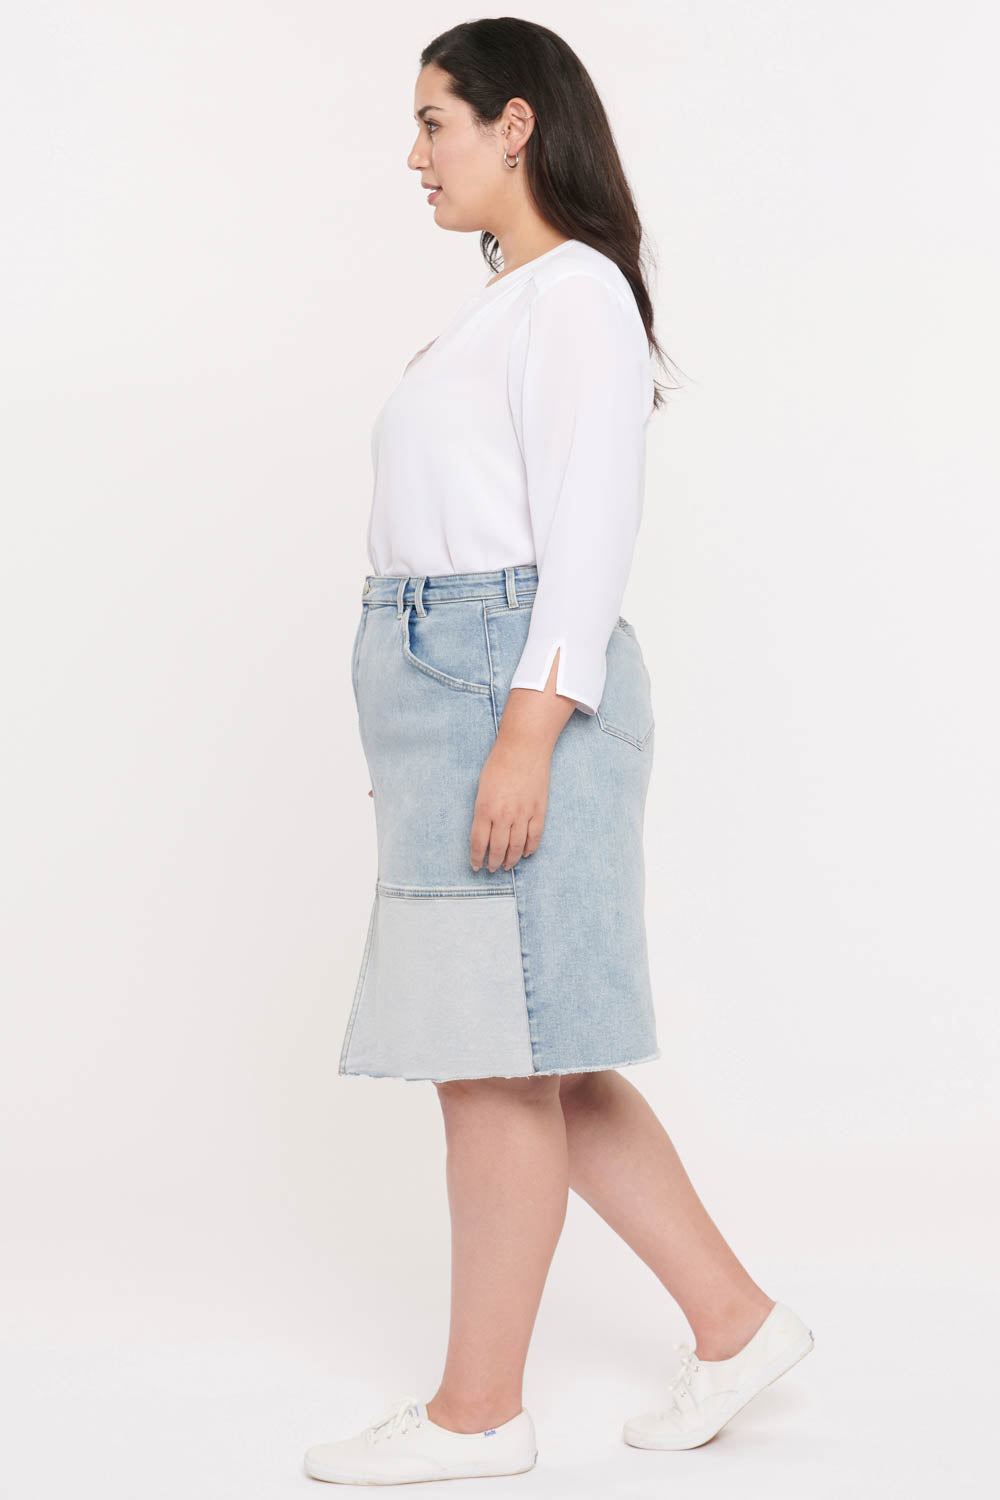 NYDJ Midi Skirt In Plus Size With Patch Detail and Frayed Hem - Destructed Radiance Base